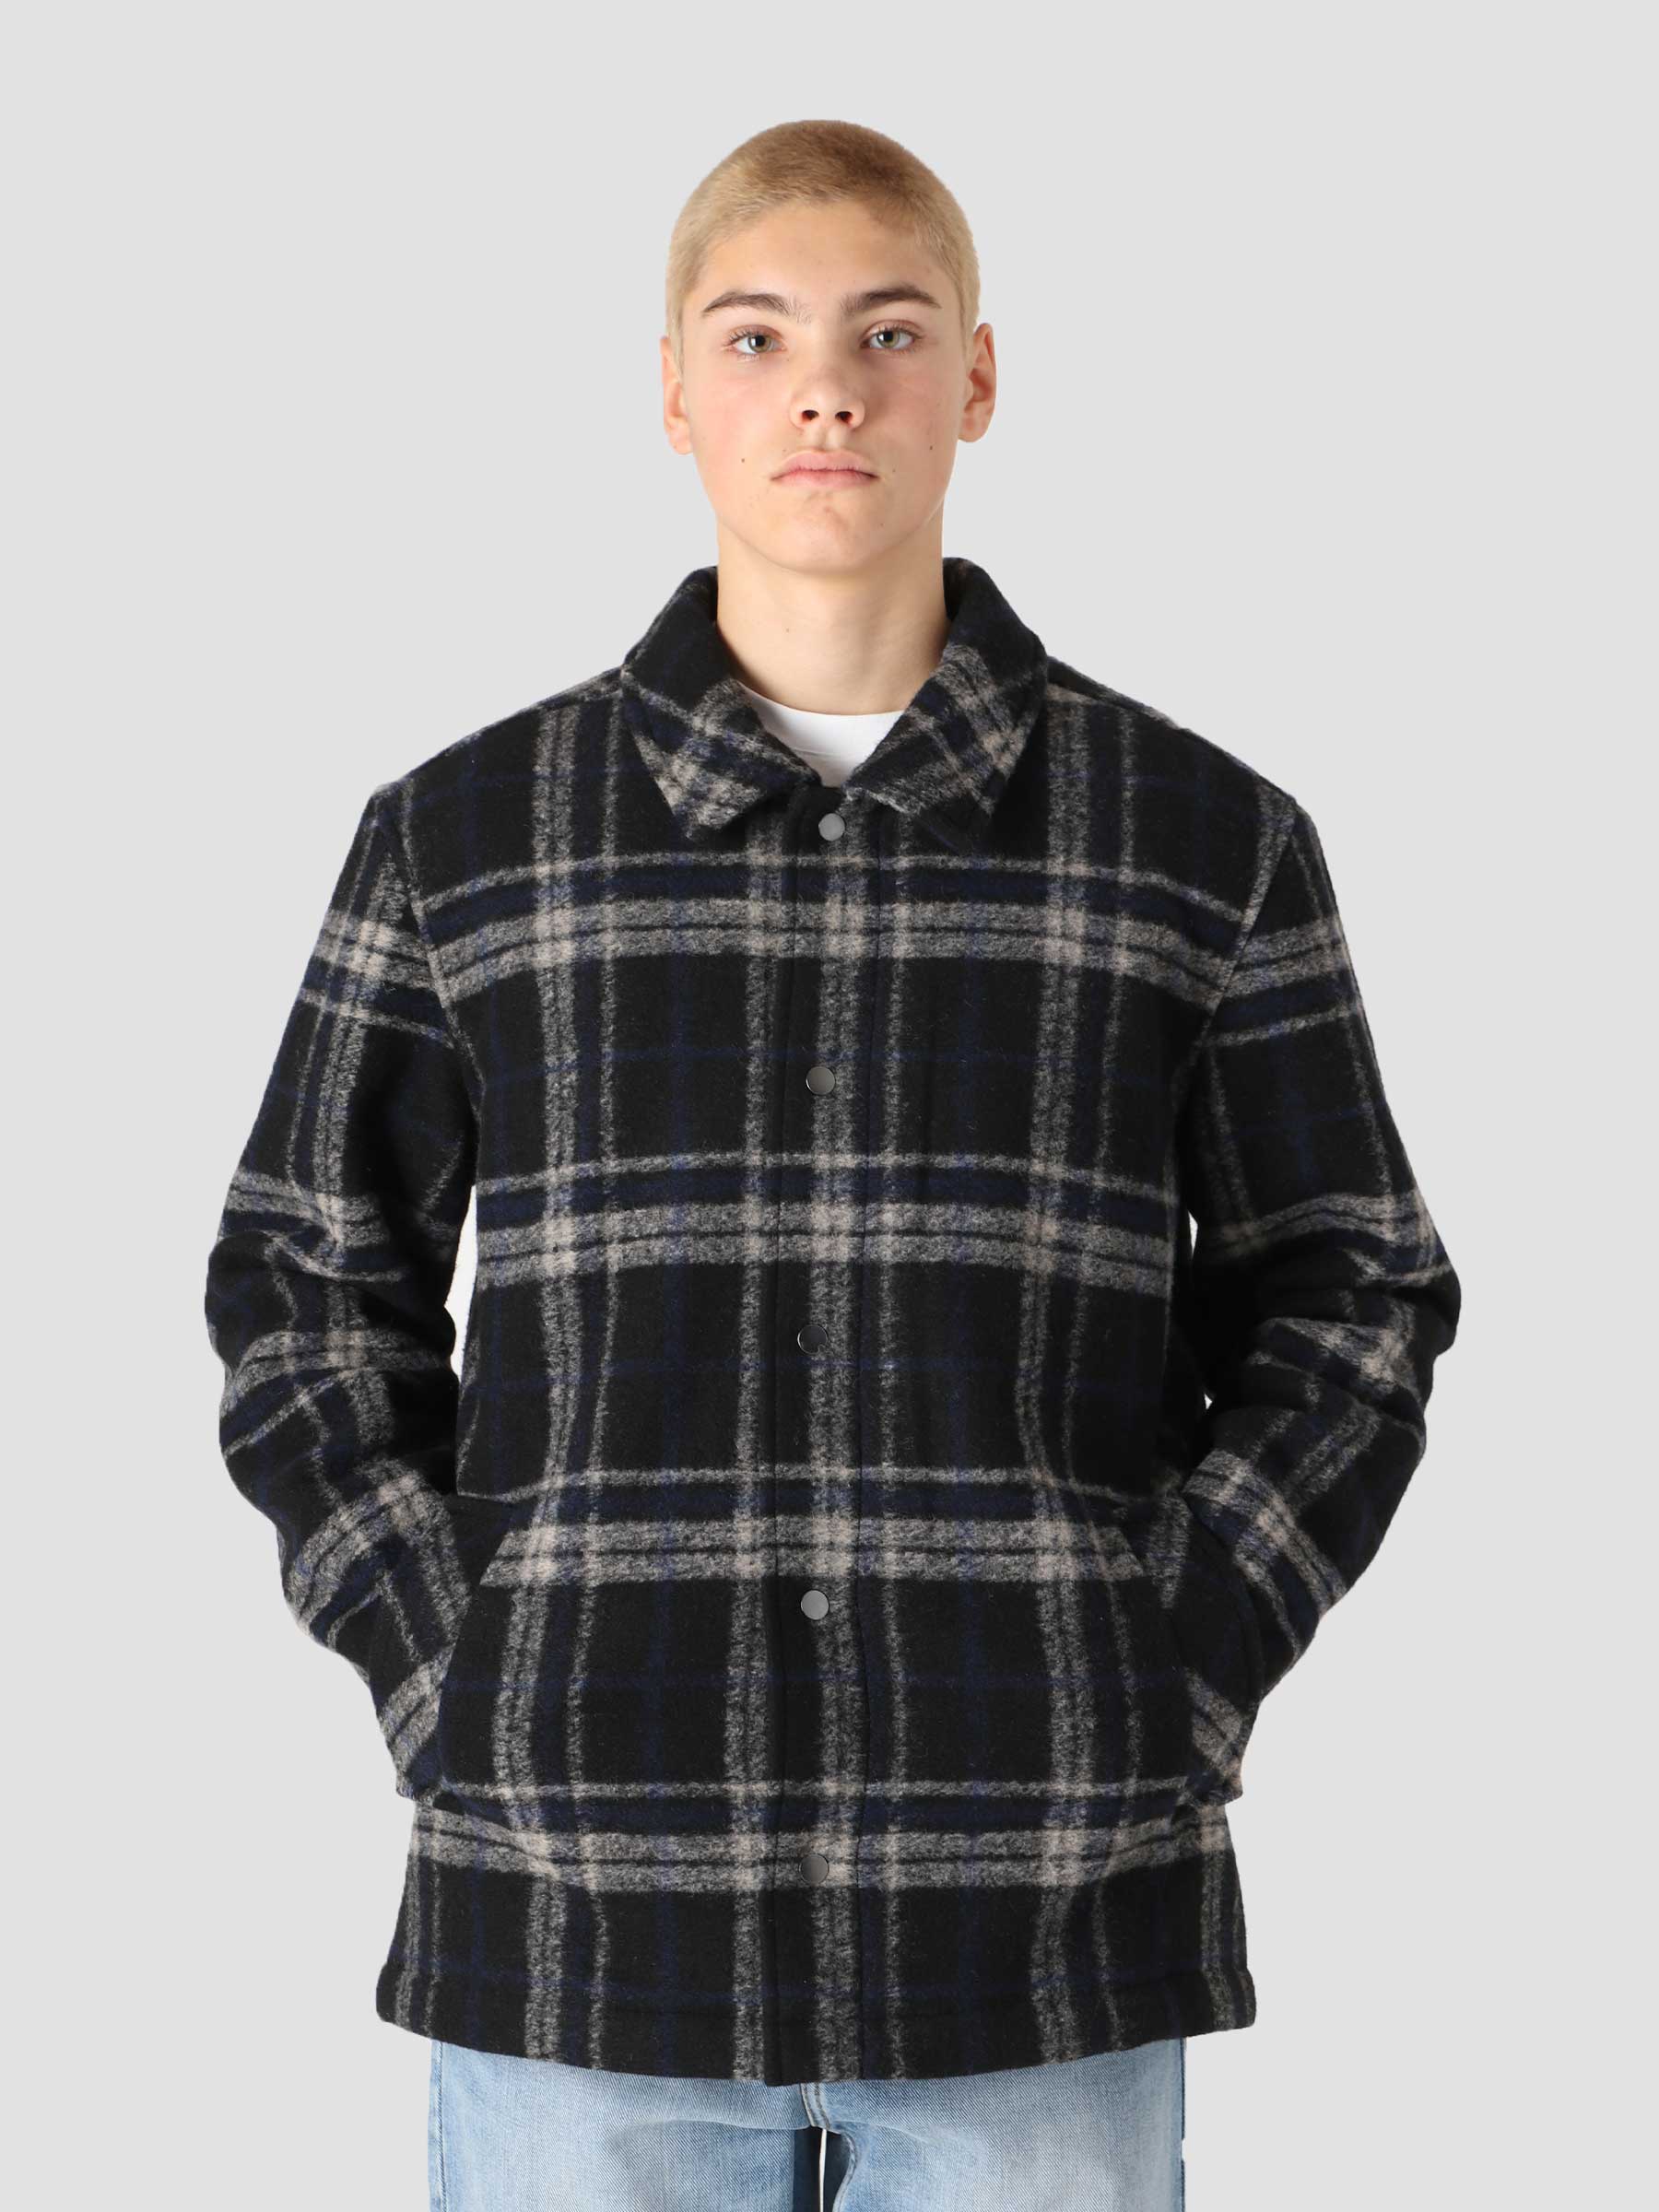 QB401 Checked Worker Jacket